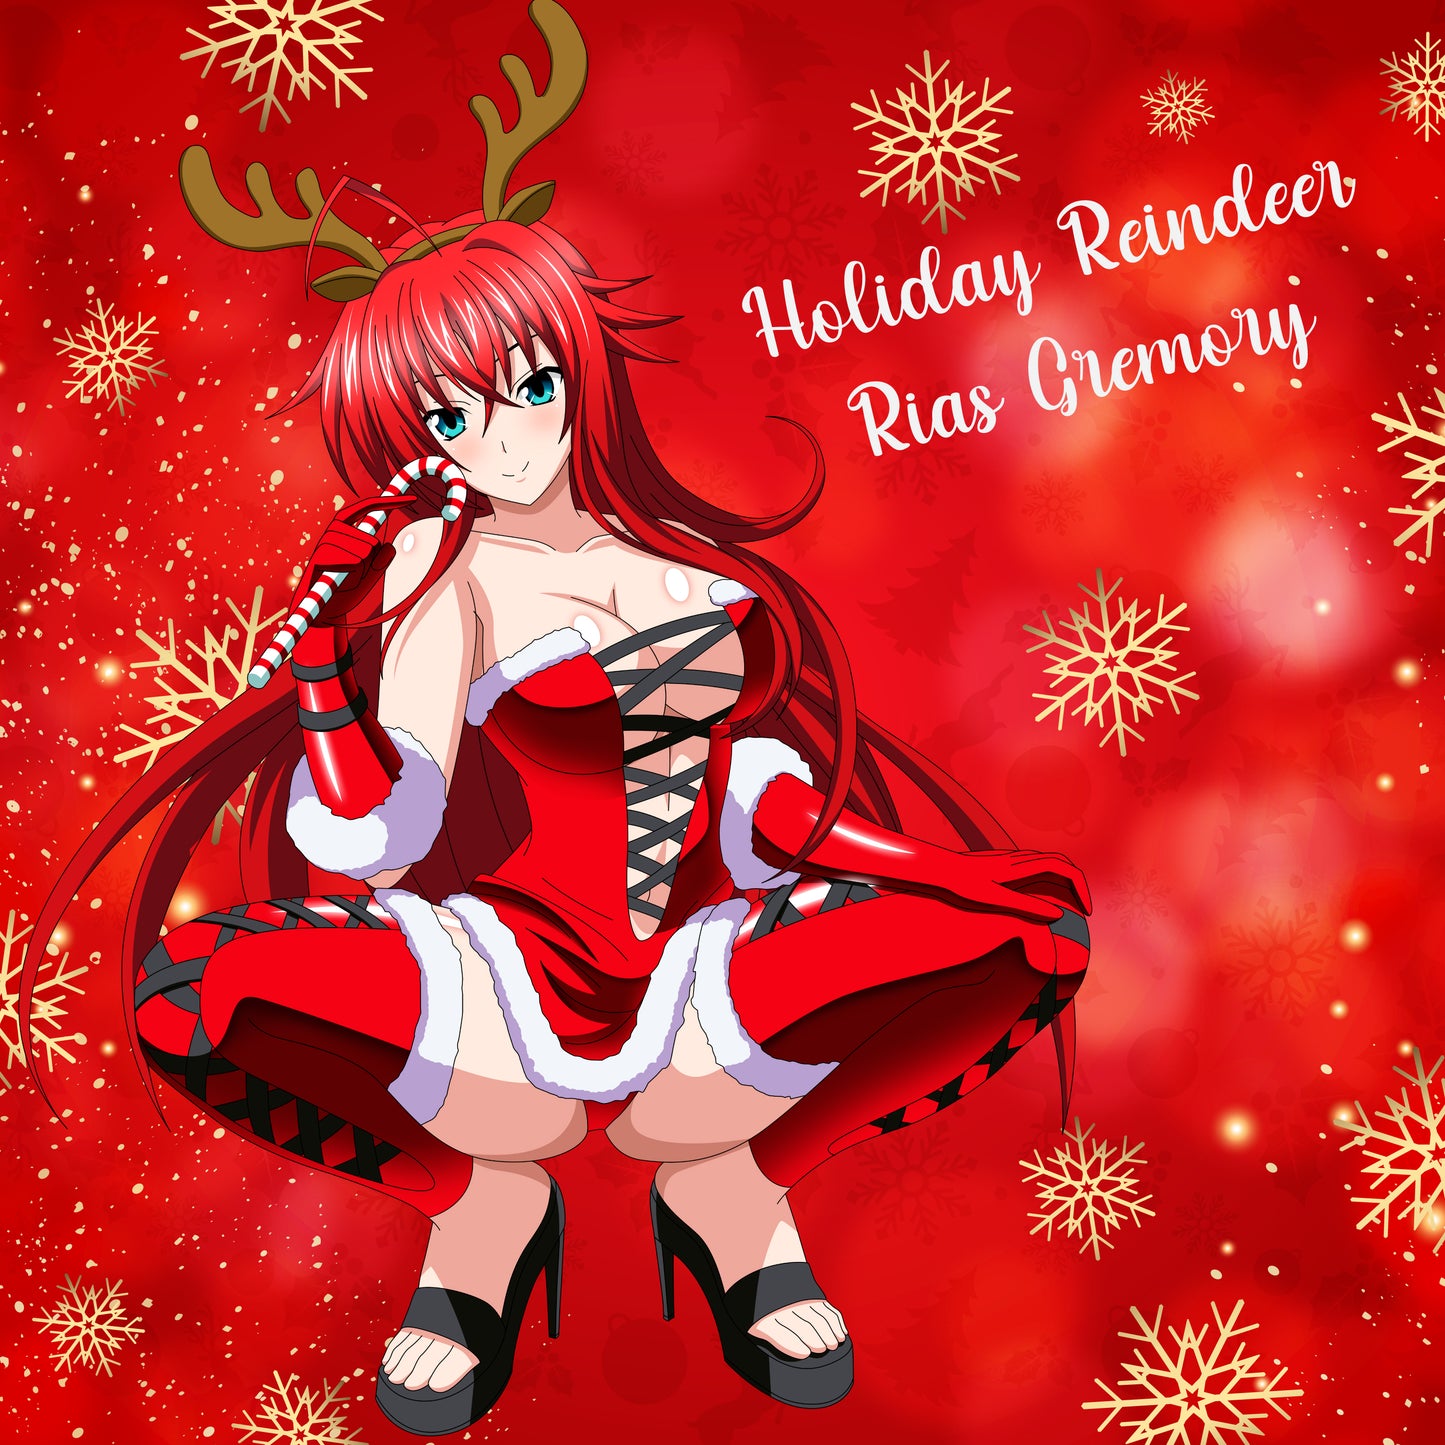 Holiday Reindeer Rias Gremory